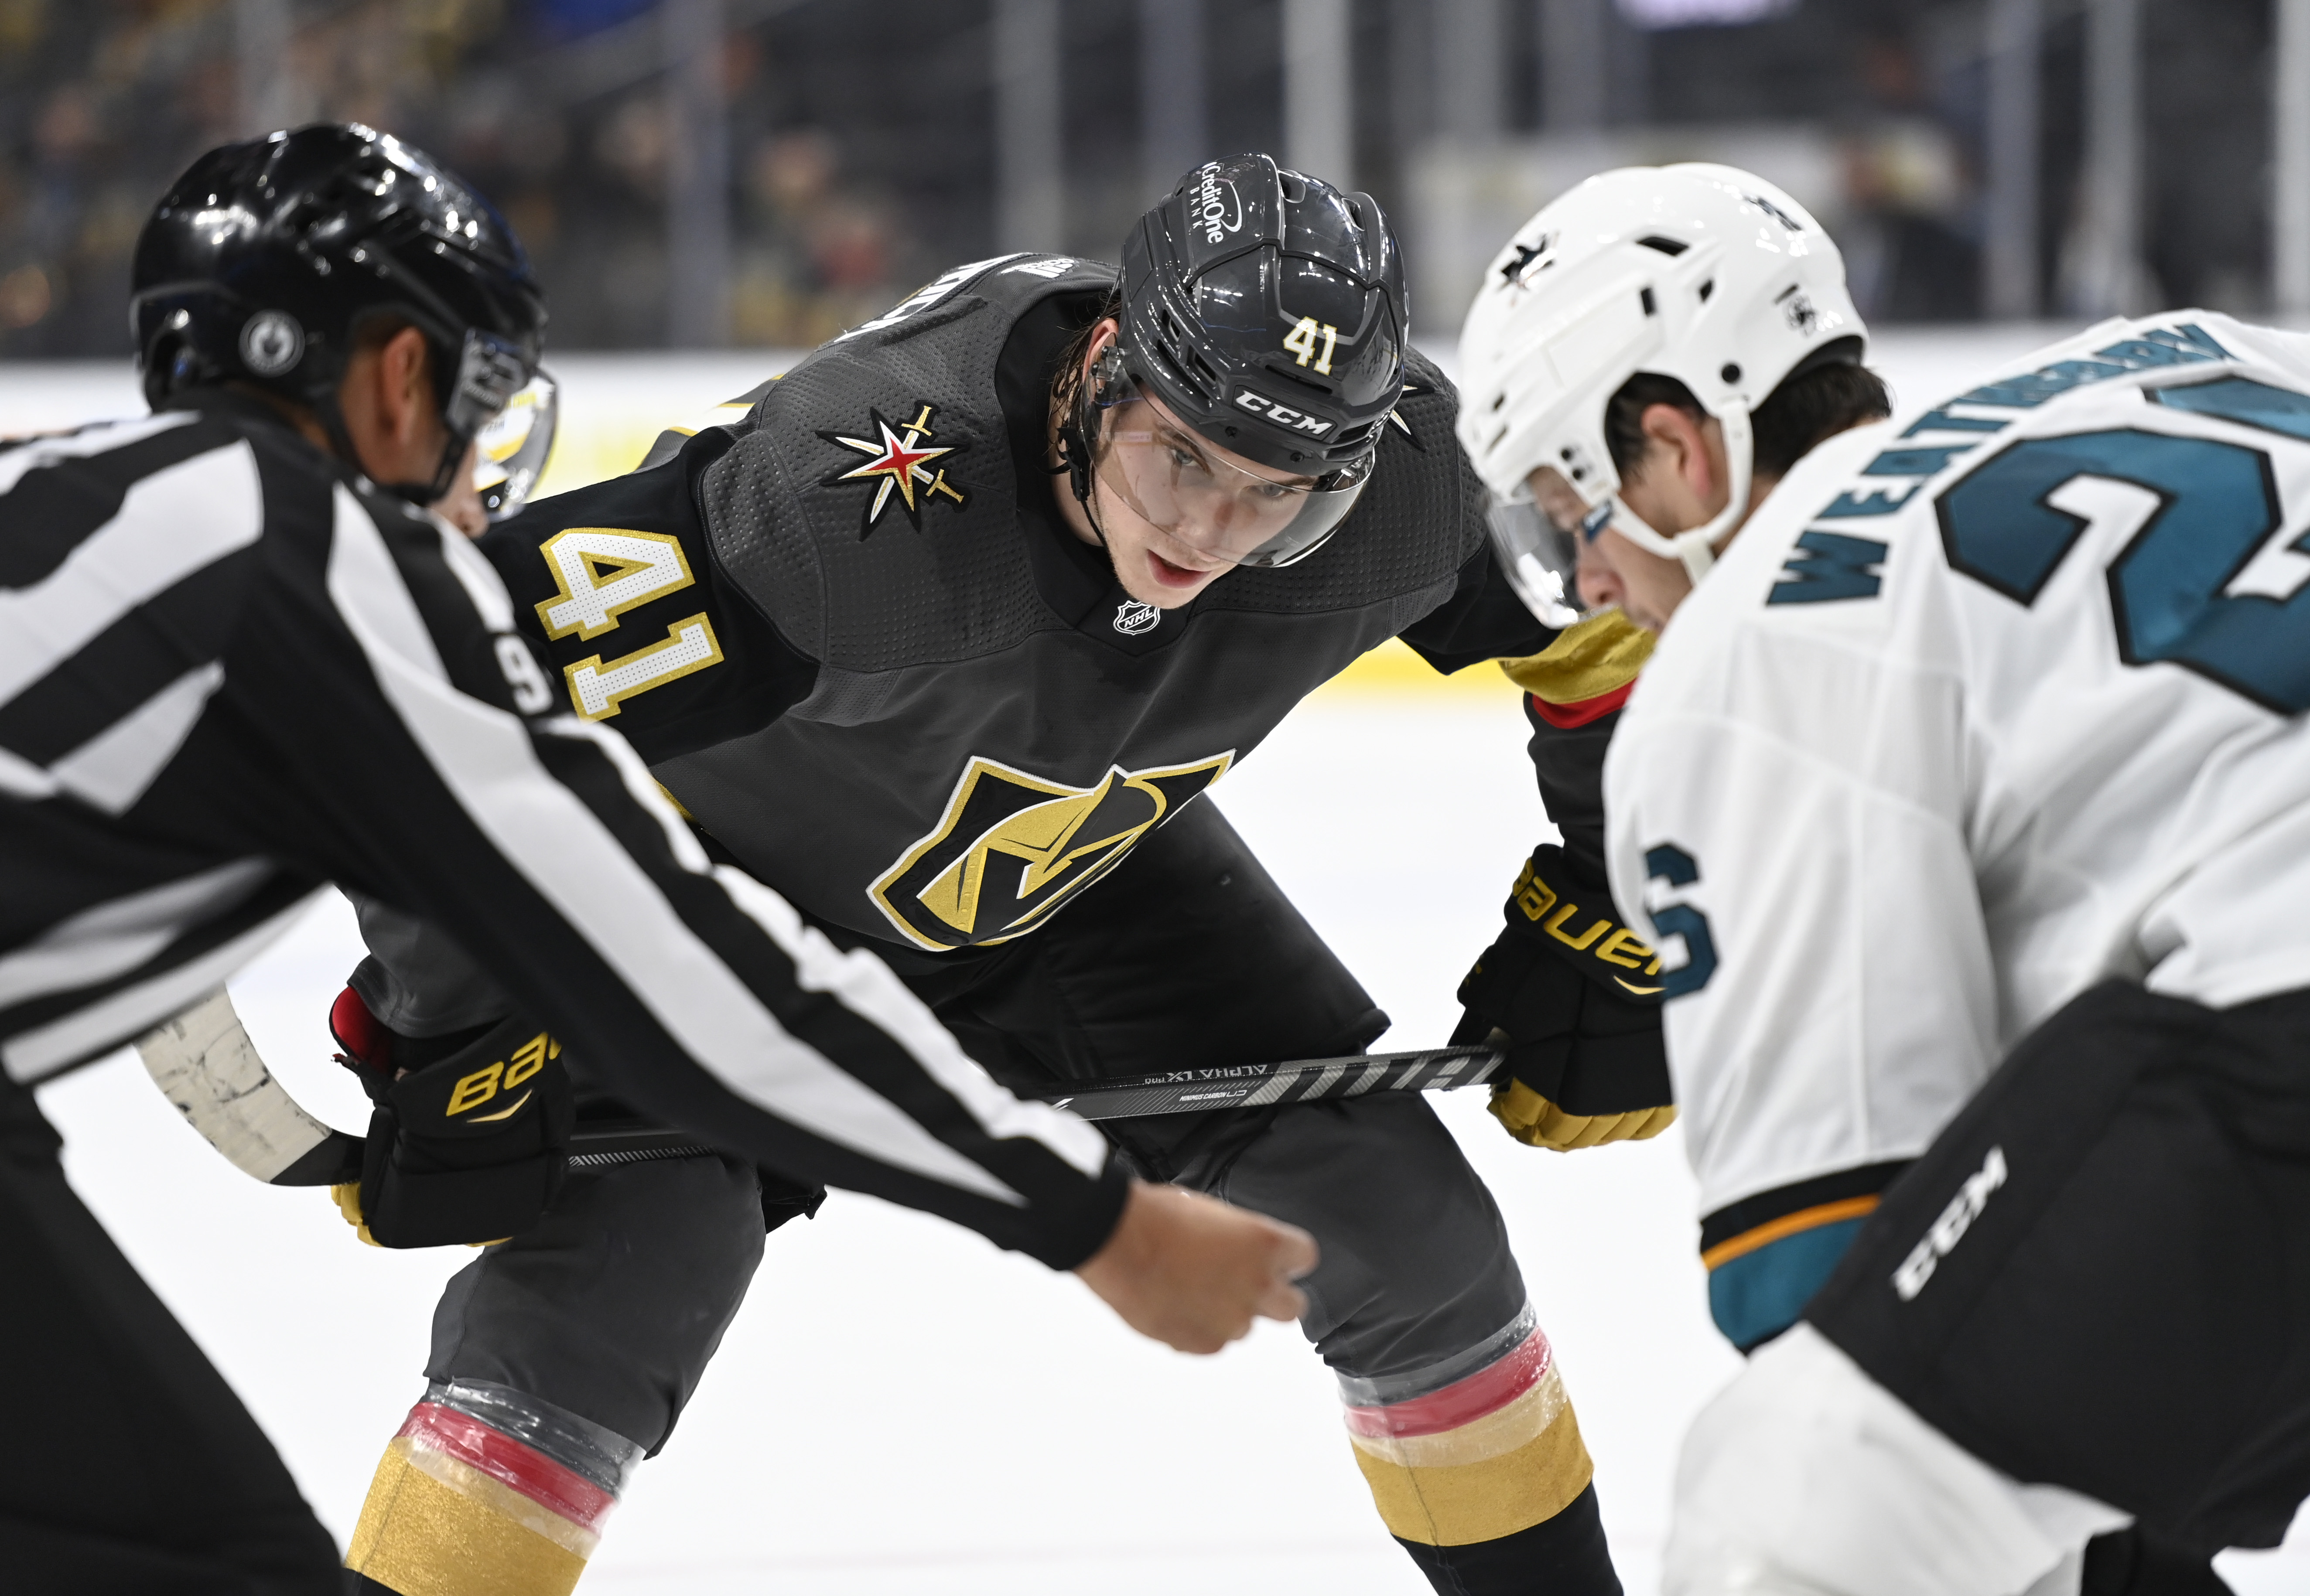 Nolan Patrick #41 of the Vegas Golden Knights faces off with Jasper Weatherby #26 of the San Jose Sharks during the third period at T-Mobile Arena on September 26, 2021 in Las Vegas, Nevada.